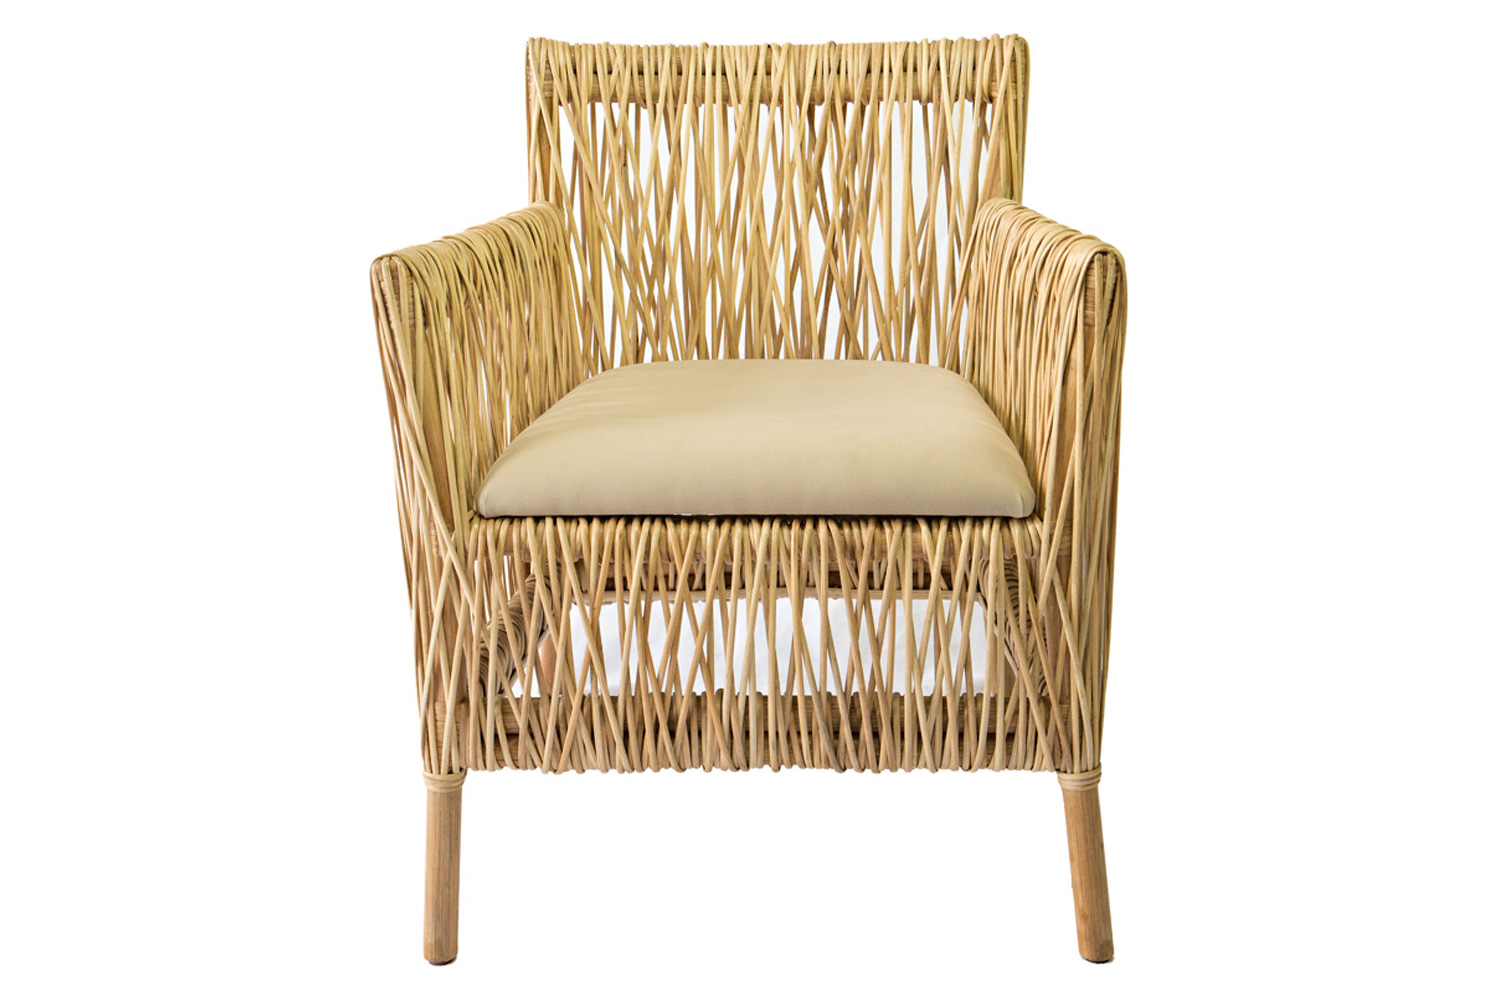 The Oggetti™ Hatch Dining Chair - Natural is a sturdy and comfortable chair that will complement your design